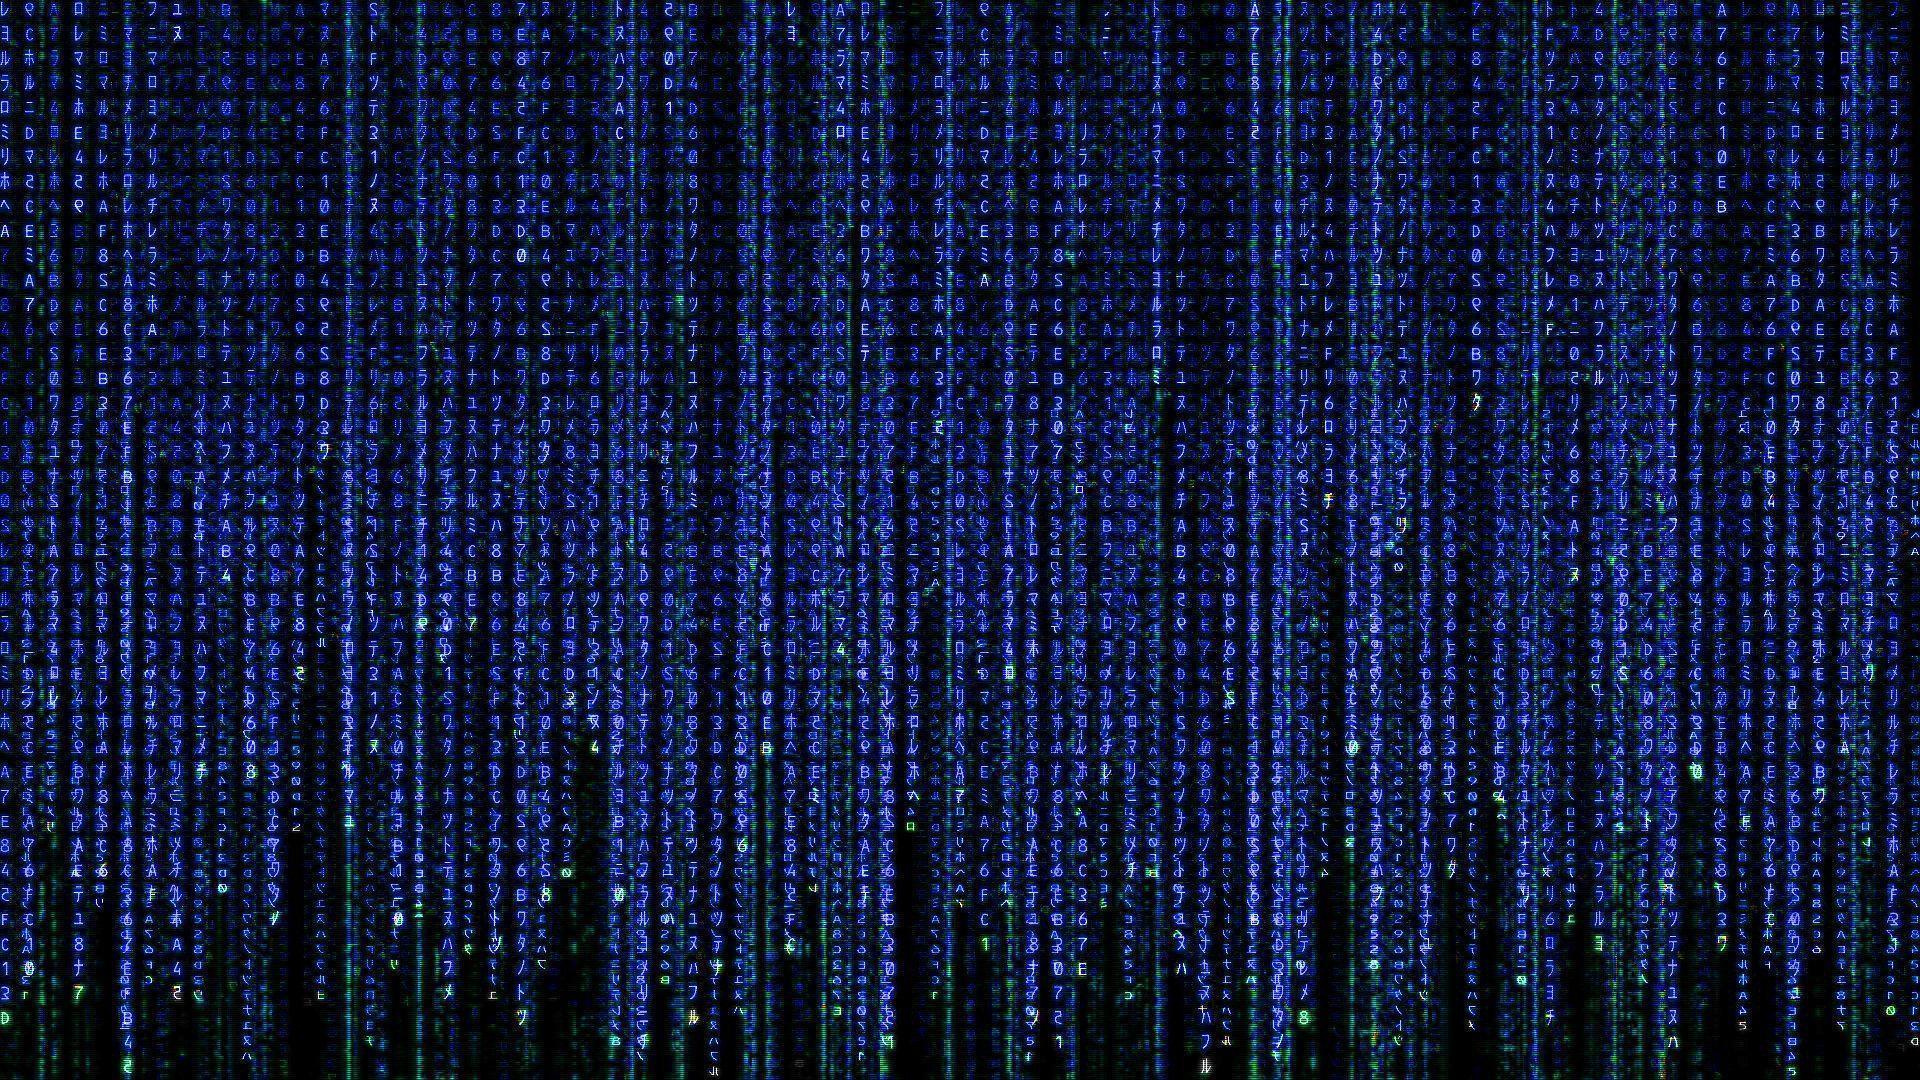 Picture Collection for Mobile: Computer Science Wallpaper, NMgnCP.com